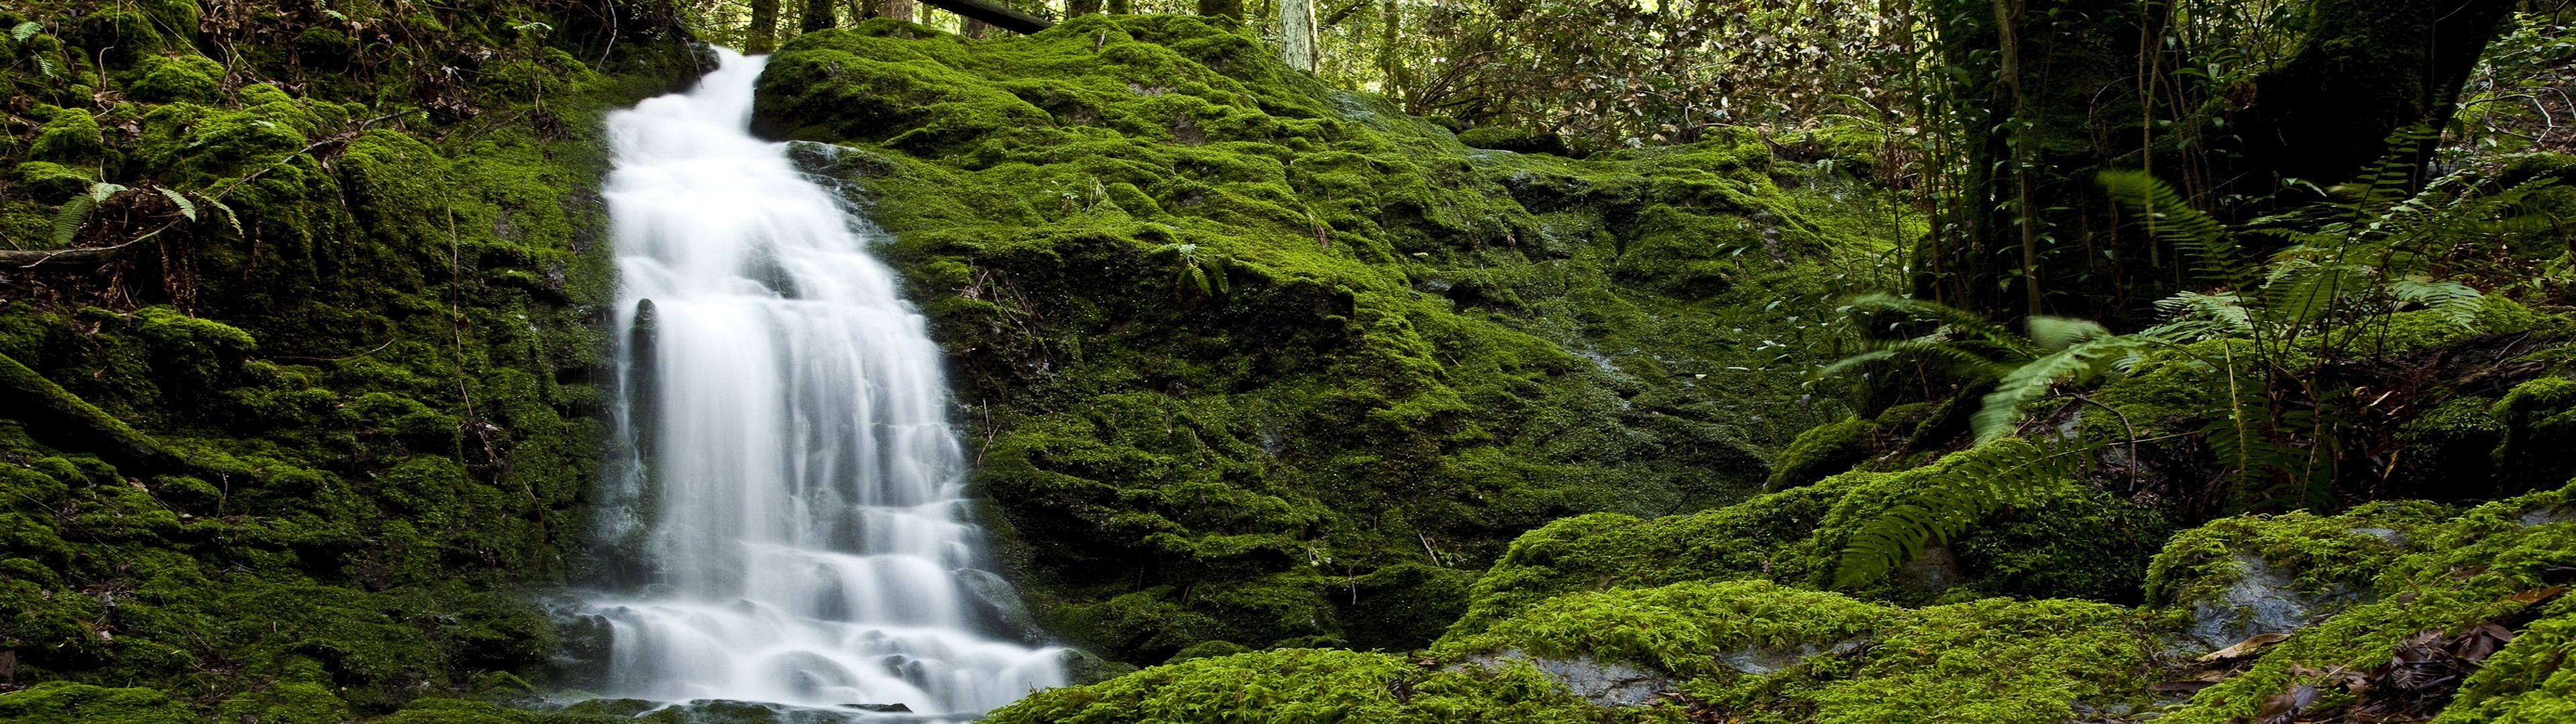 General 3840x1080 nature waterfall forest